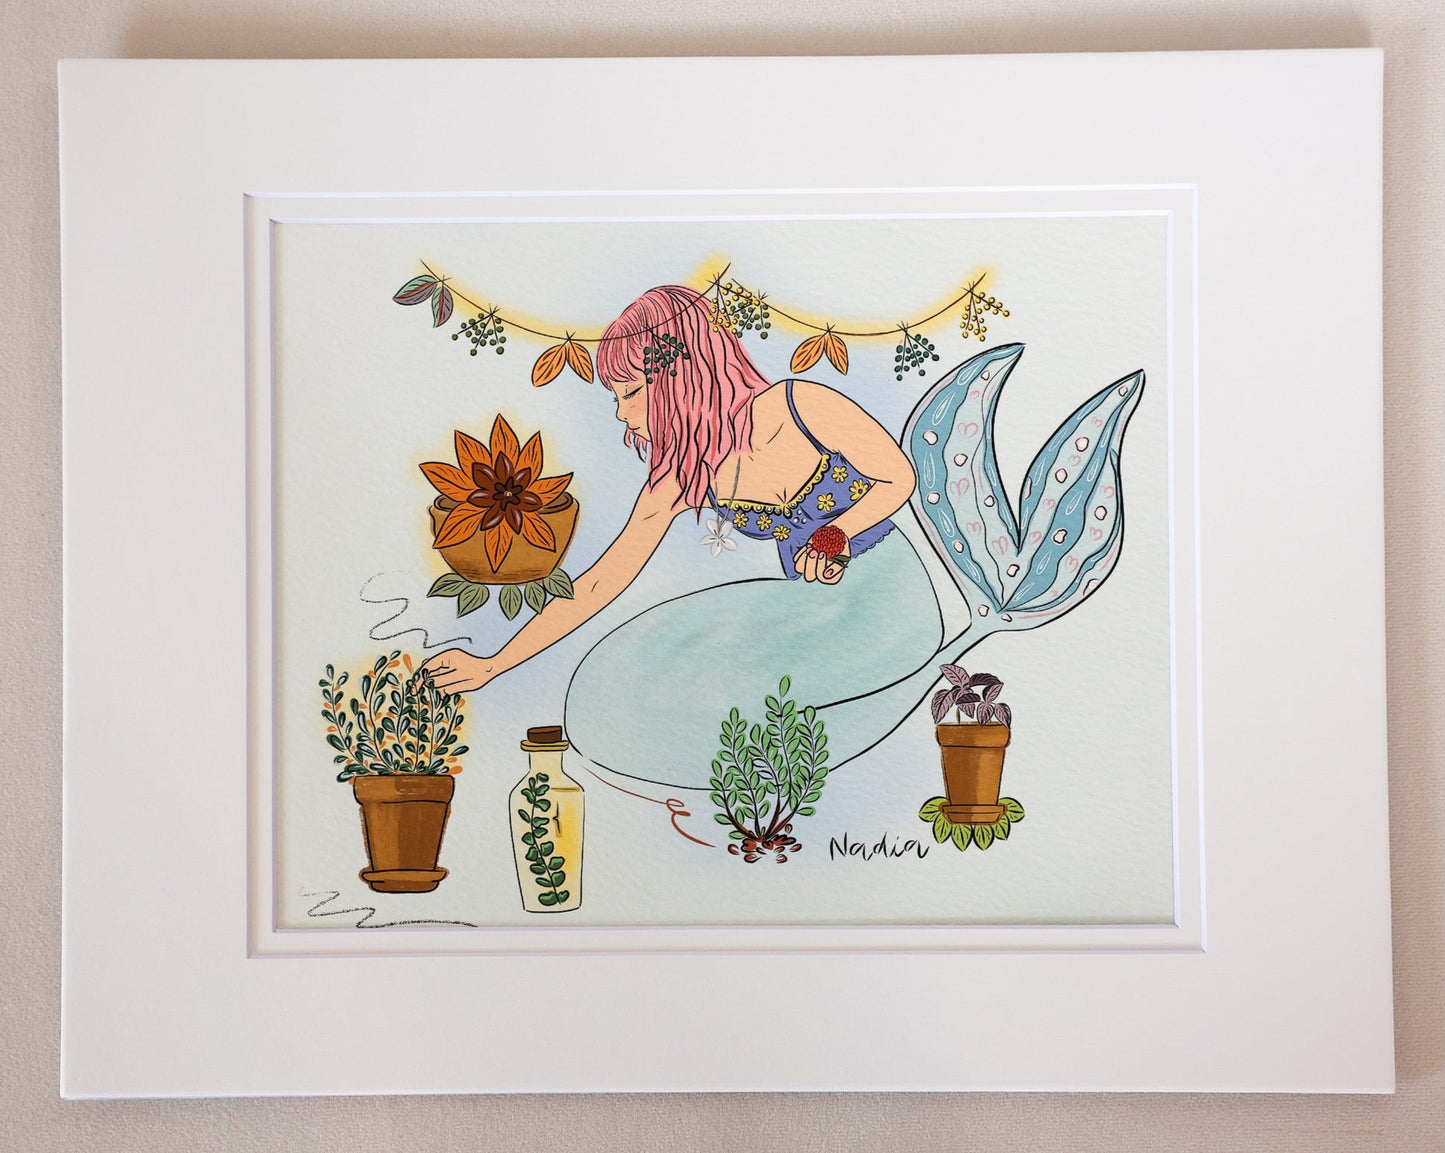 Hand-drawn matted art print. Mermaid with pink hair who grows potted plants